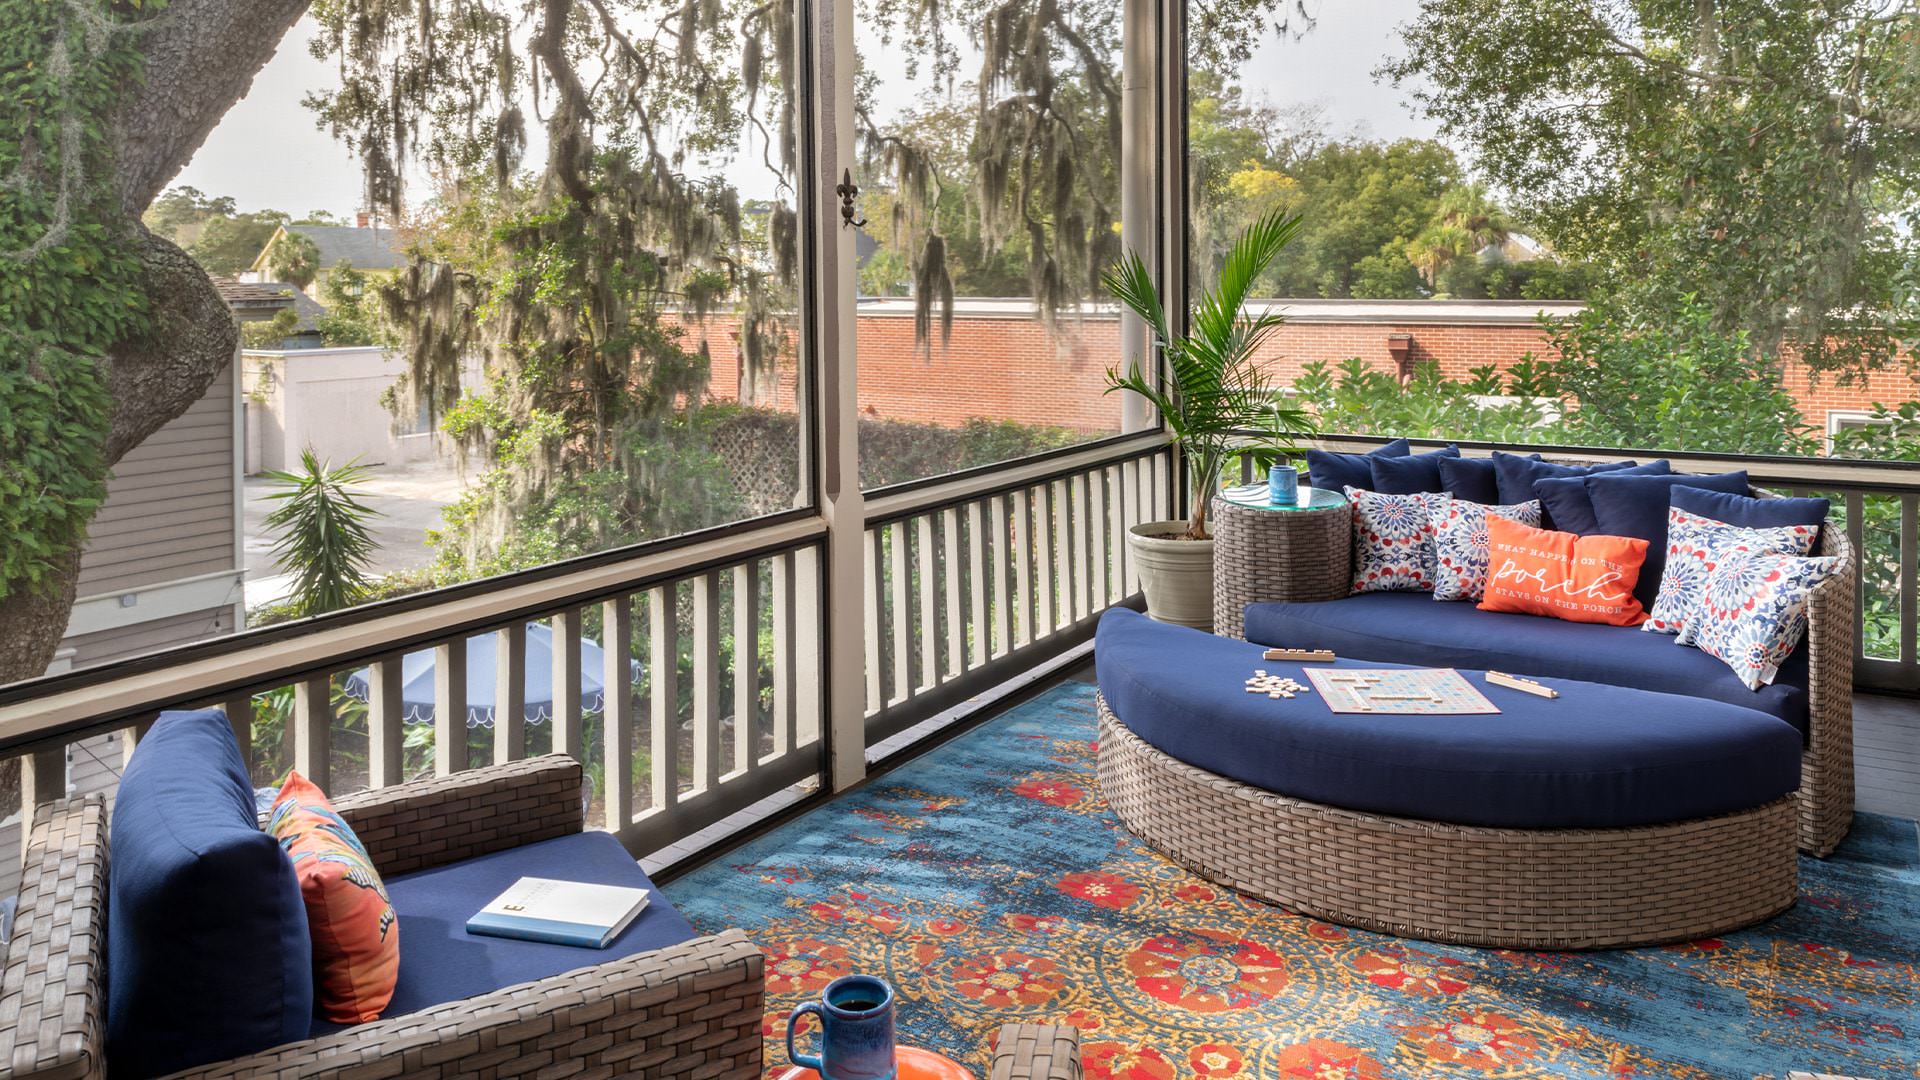 Large screened in porch on second level with light wicker patio furniture with blue fabric and large area rug